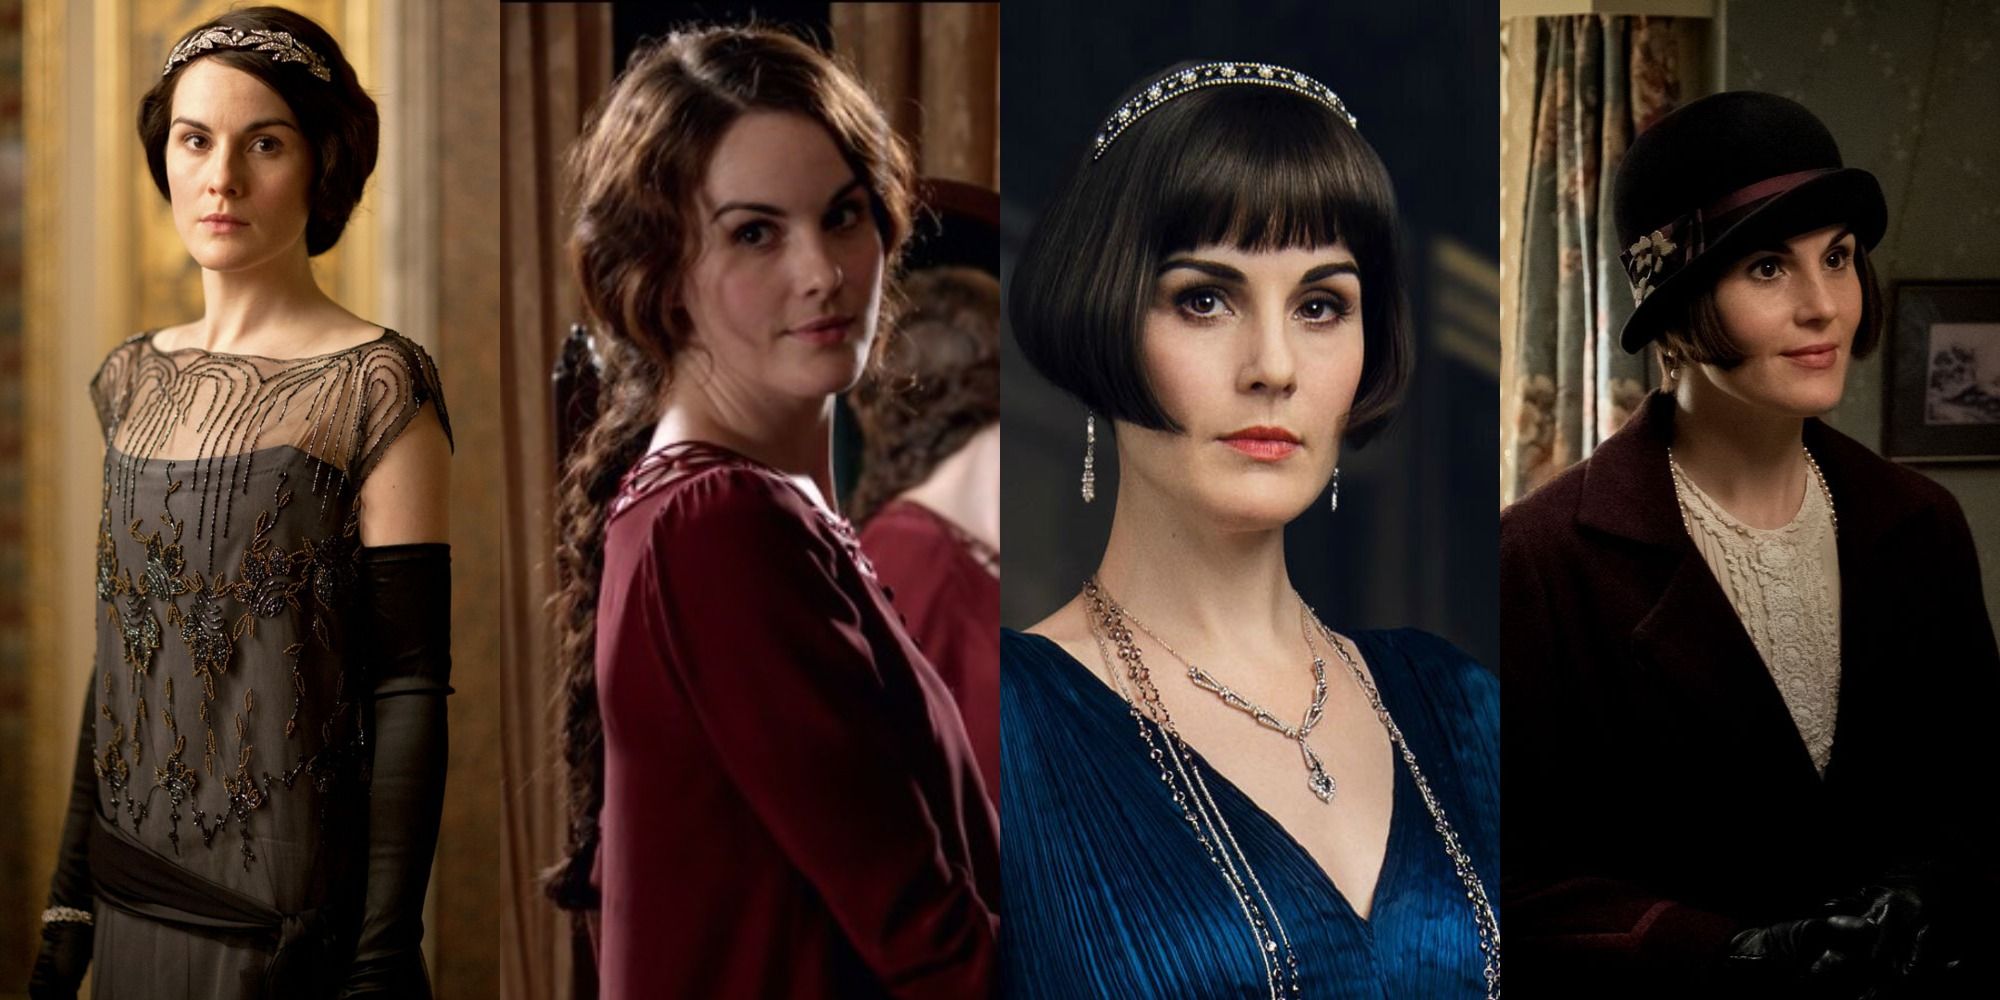 Four images of Mary from Downton Abbey.